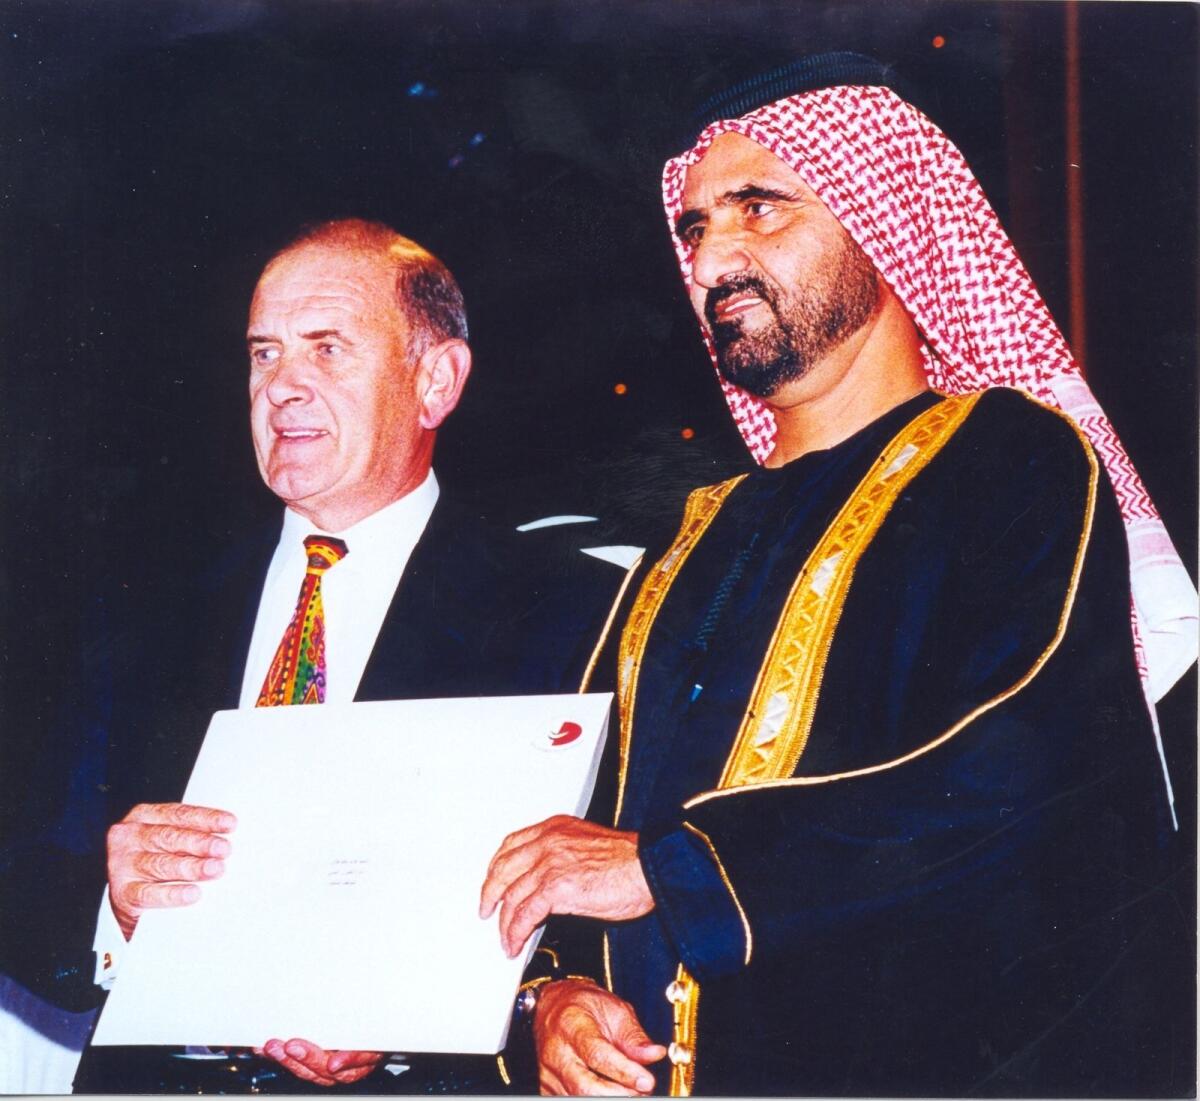 His Highness Sheikh Mohammed bin Rashid Al Maktoum, Vice-President and Prime Minister of the UAE and Ruler of Dubai (then Crown Prince of Dubai and UAE Minister of Defence) presents Colm McLoughlin (then Managing Director), Dubai Duty Free, with “The Most Distinguished Employee Award” from the Dubai Government, making him the first expatriate to receive the award. Photo: Supplied